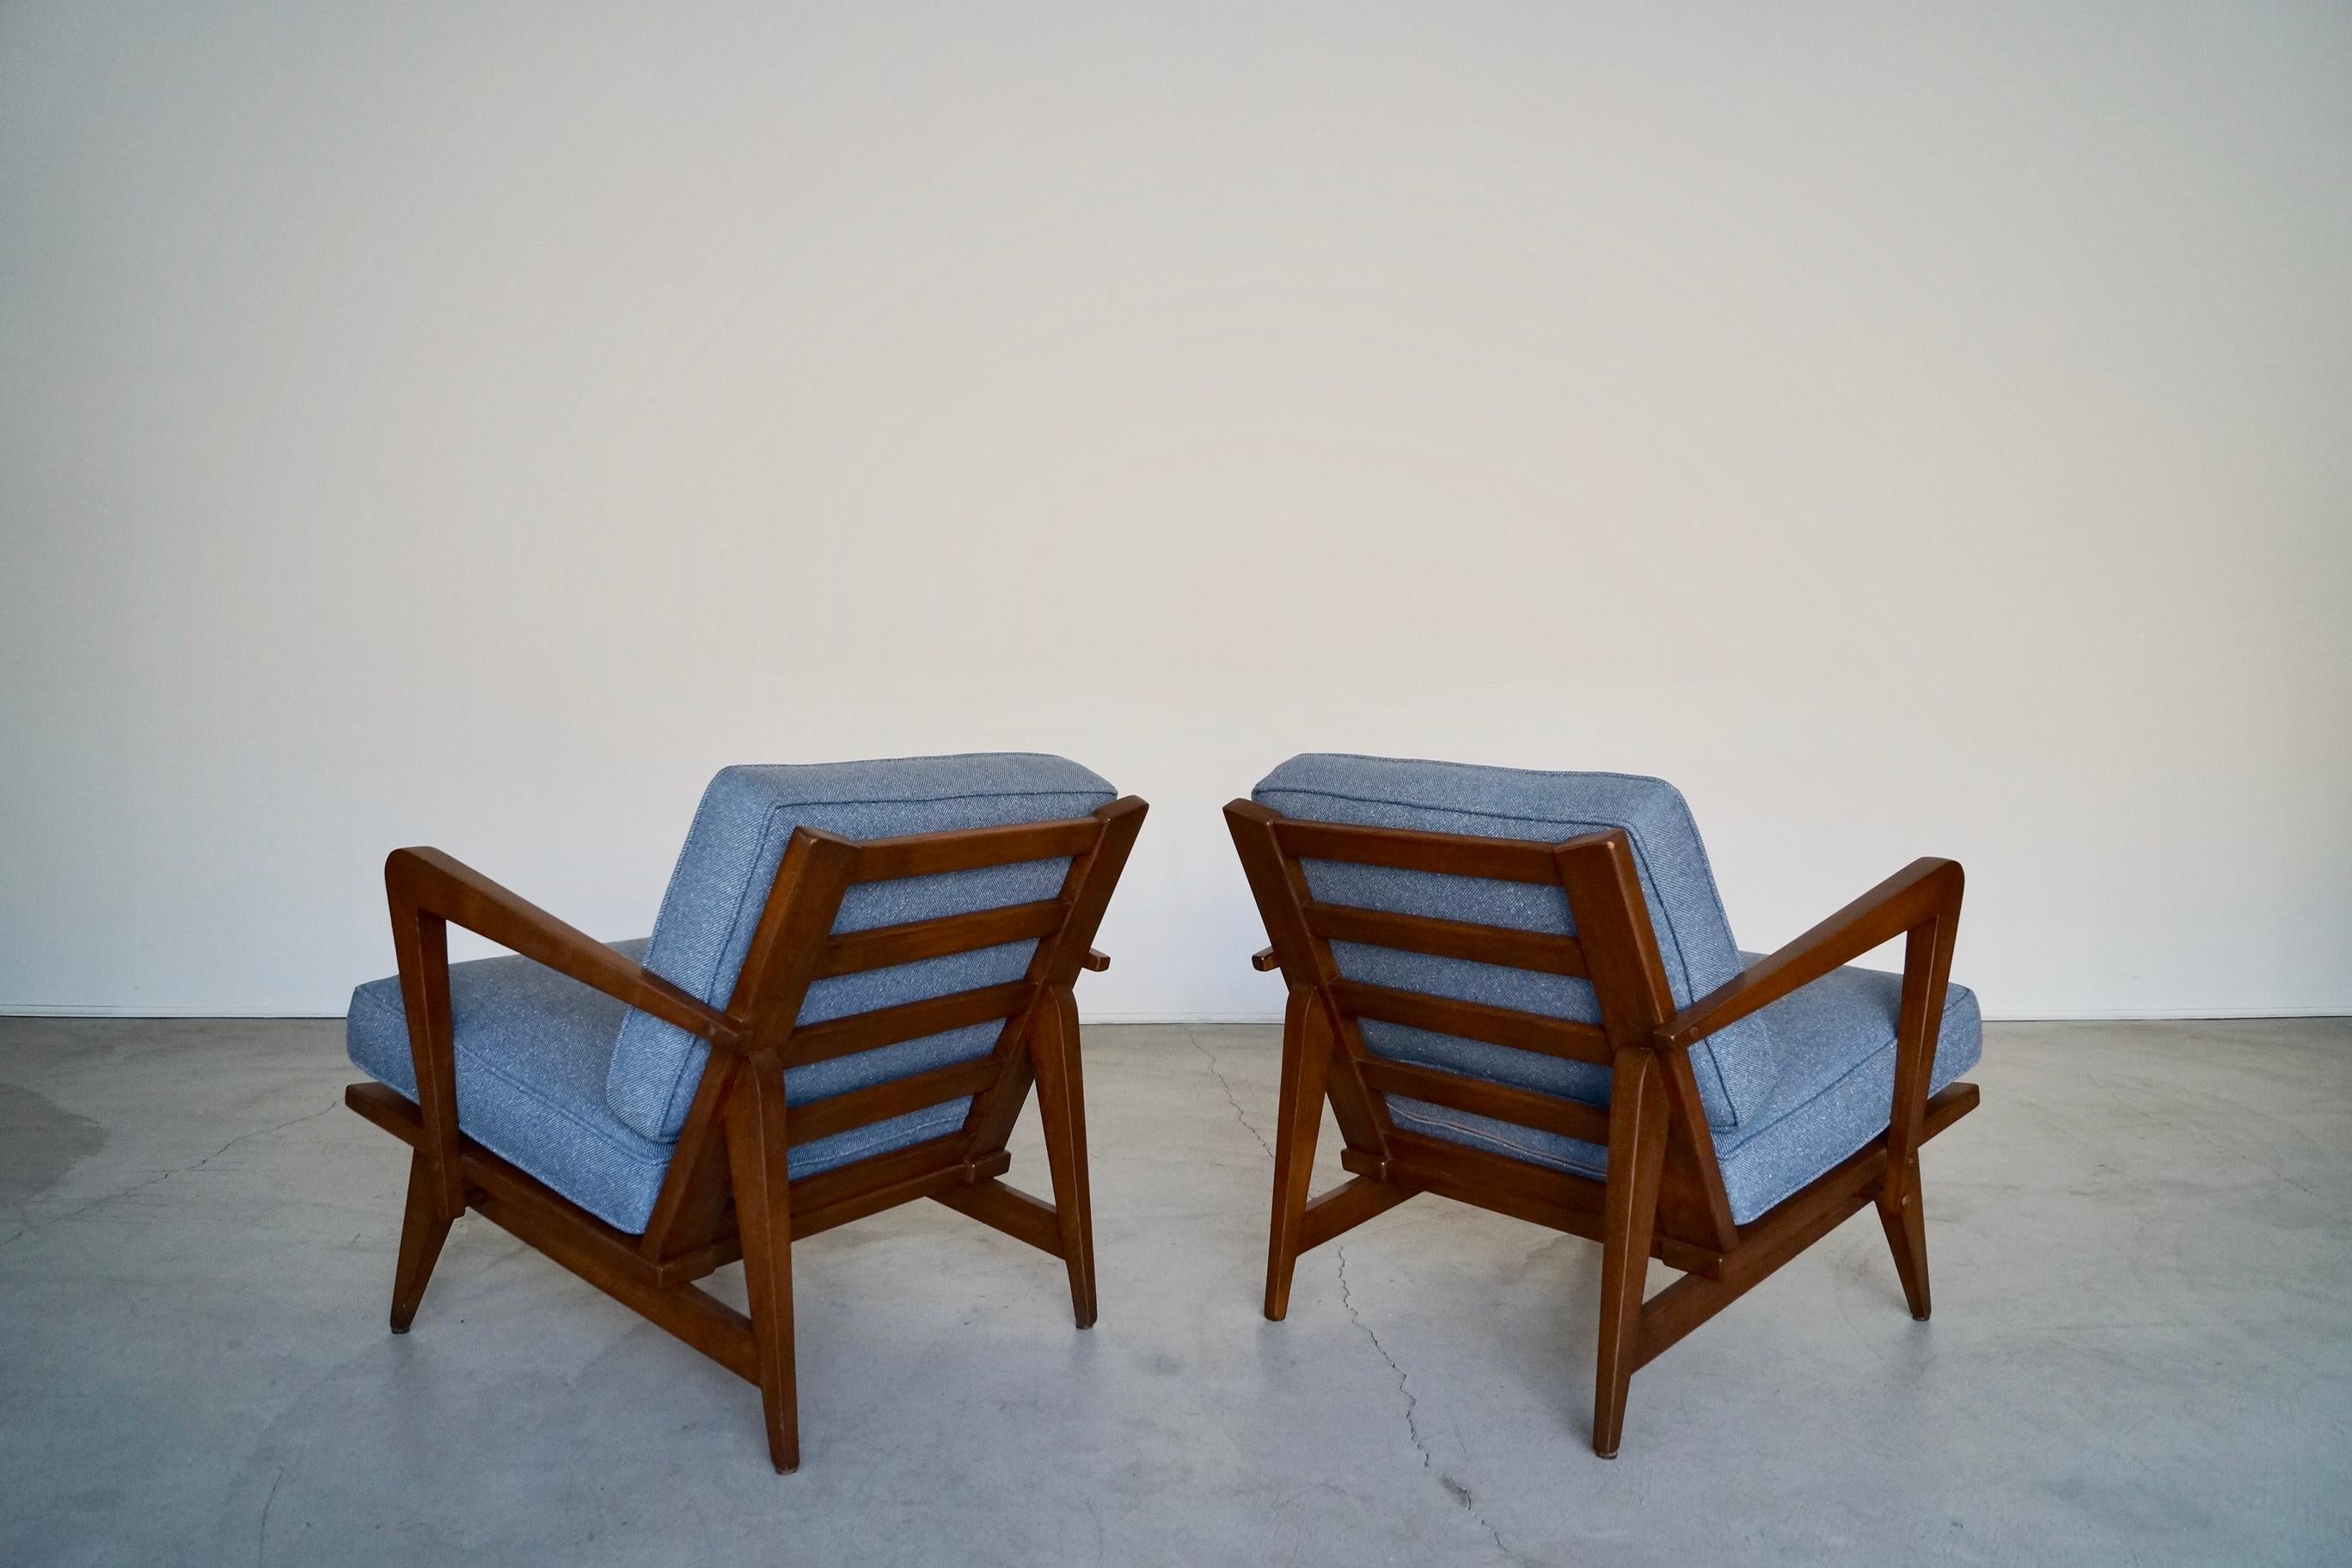 Fabric 1950's Mid-Century Modern Lounge Chairs - a Pair